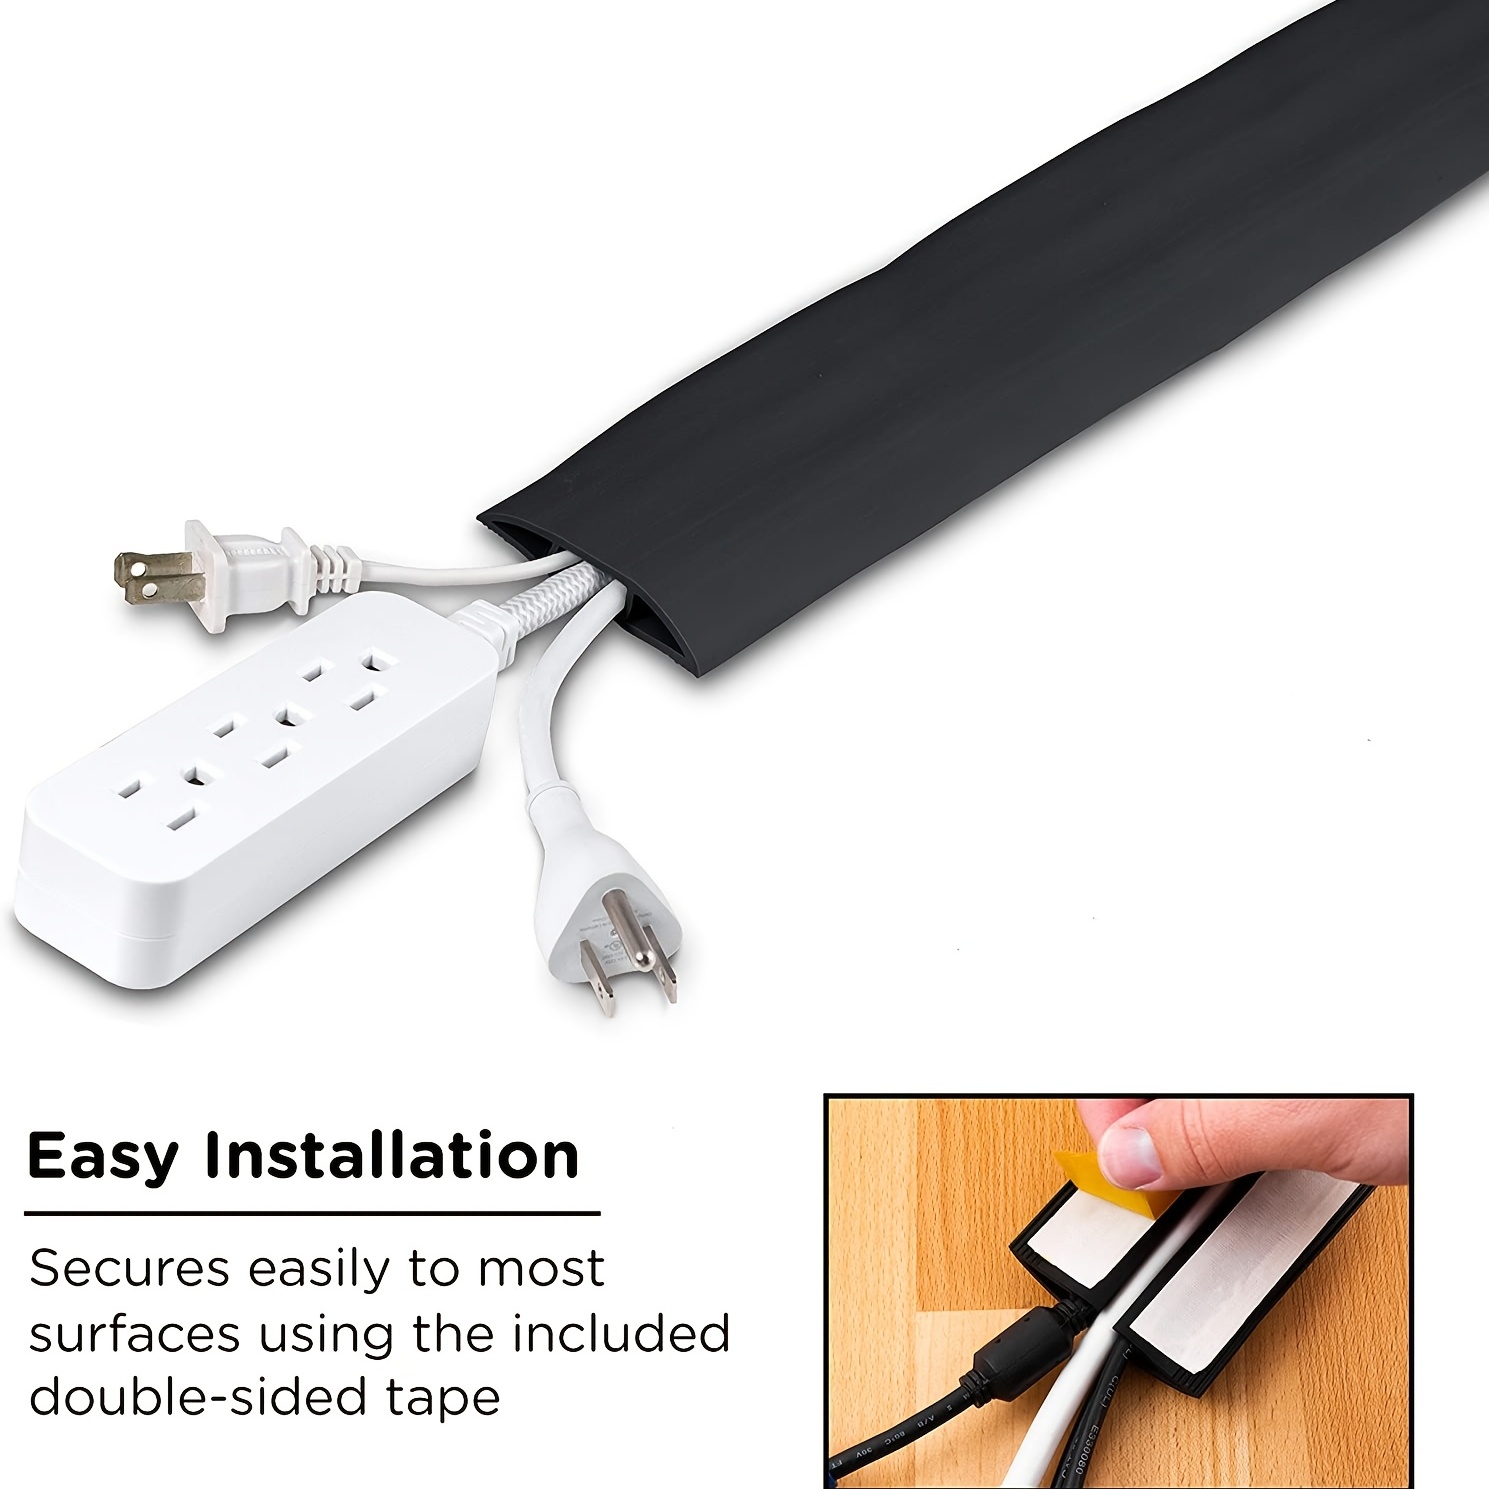 7ft Cord Cover Floor for Extension Cords, Floor Cable Cover Wire Cover to  Protect Cables & Prevent Tripping, Soft PVC Cord Hider Floor Cord  Protector